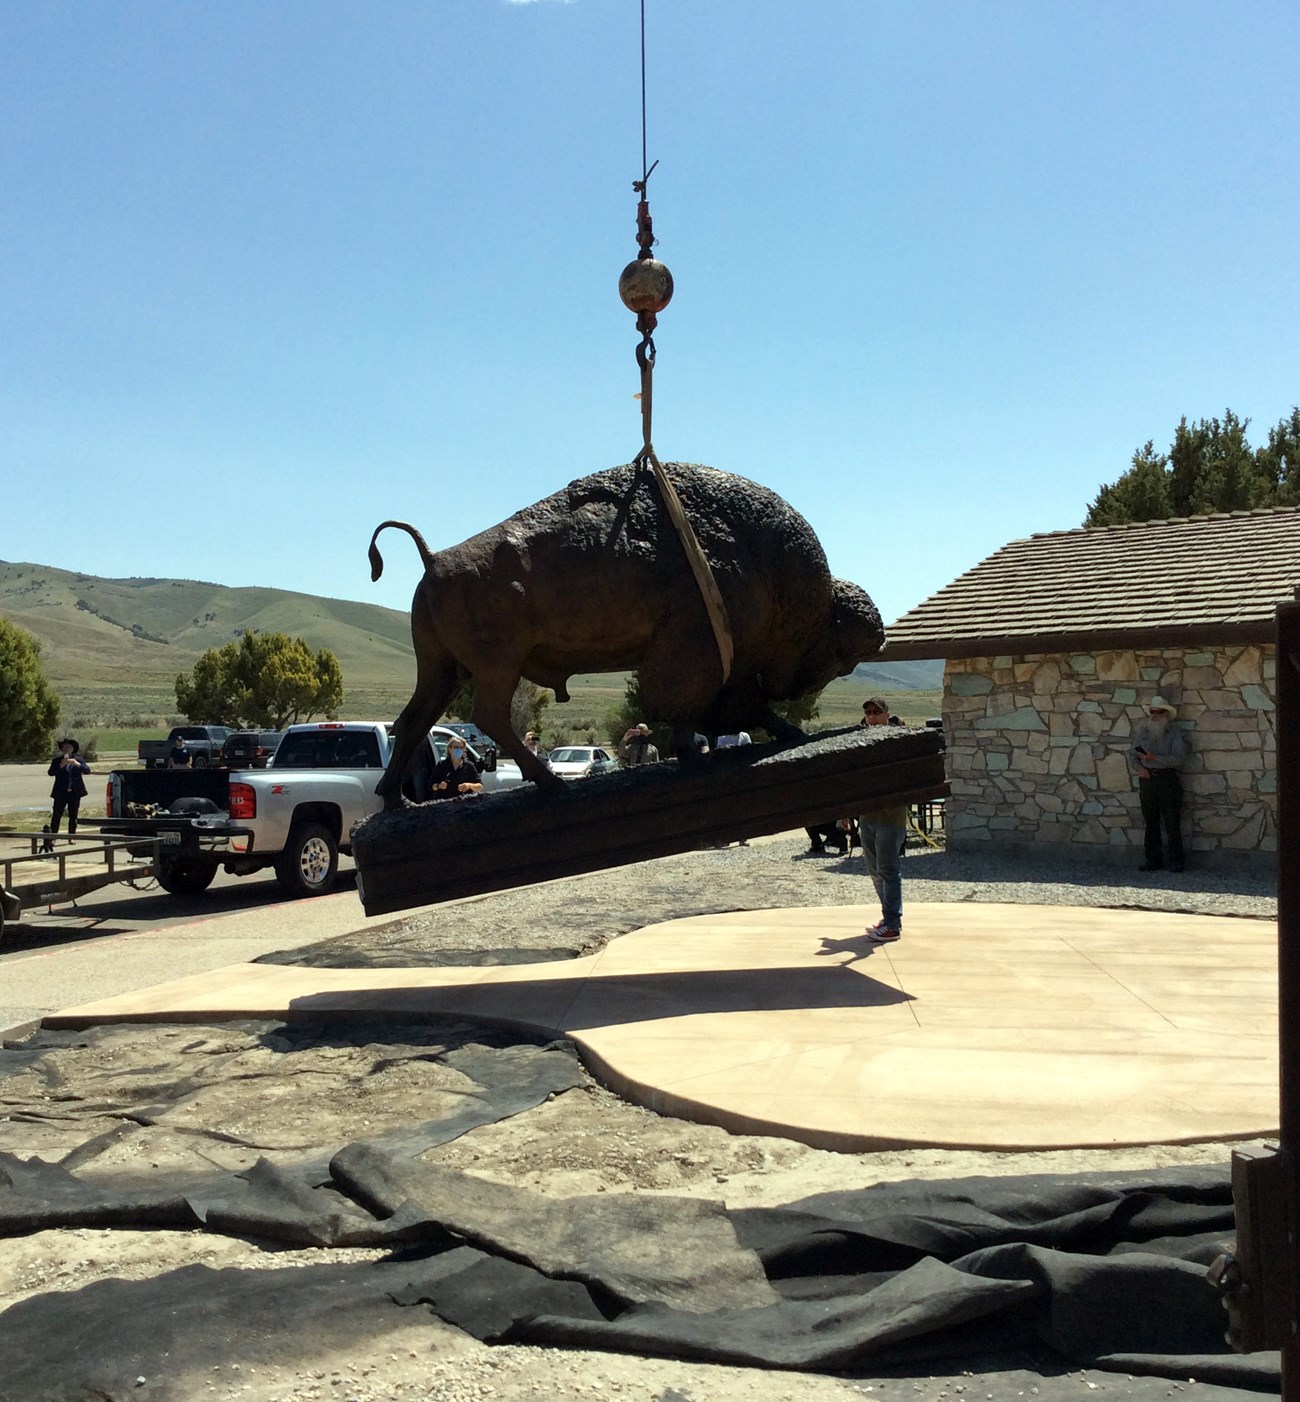 3,000 lb bison sculpture being placed in front of building by a crane